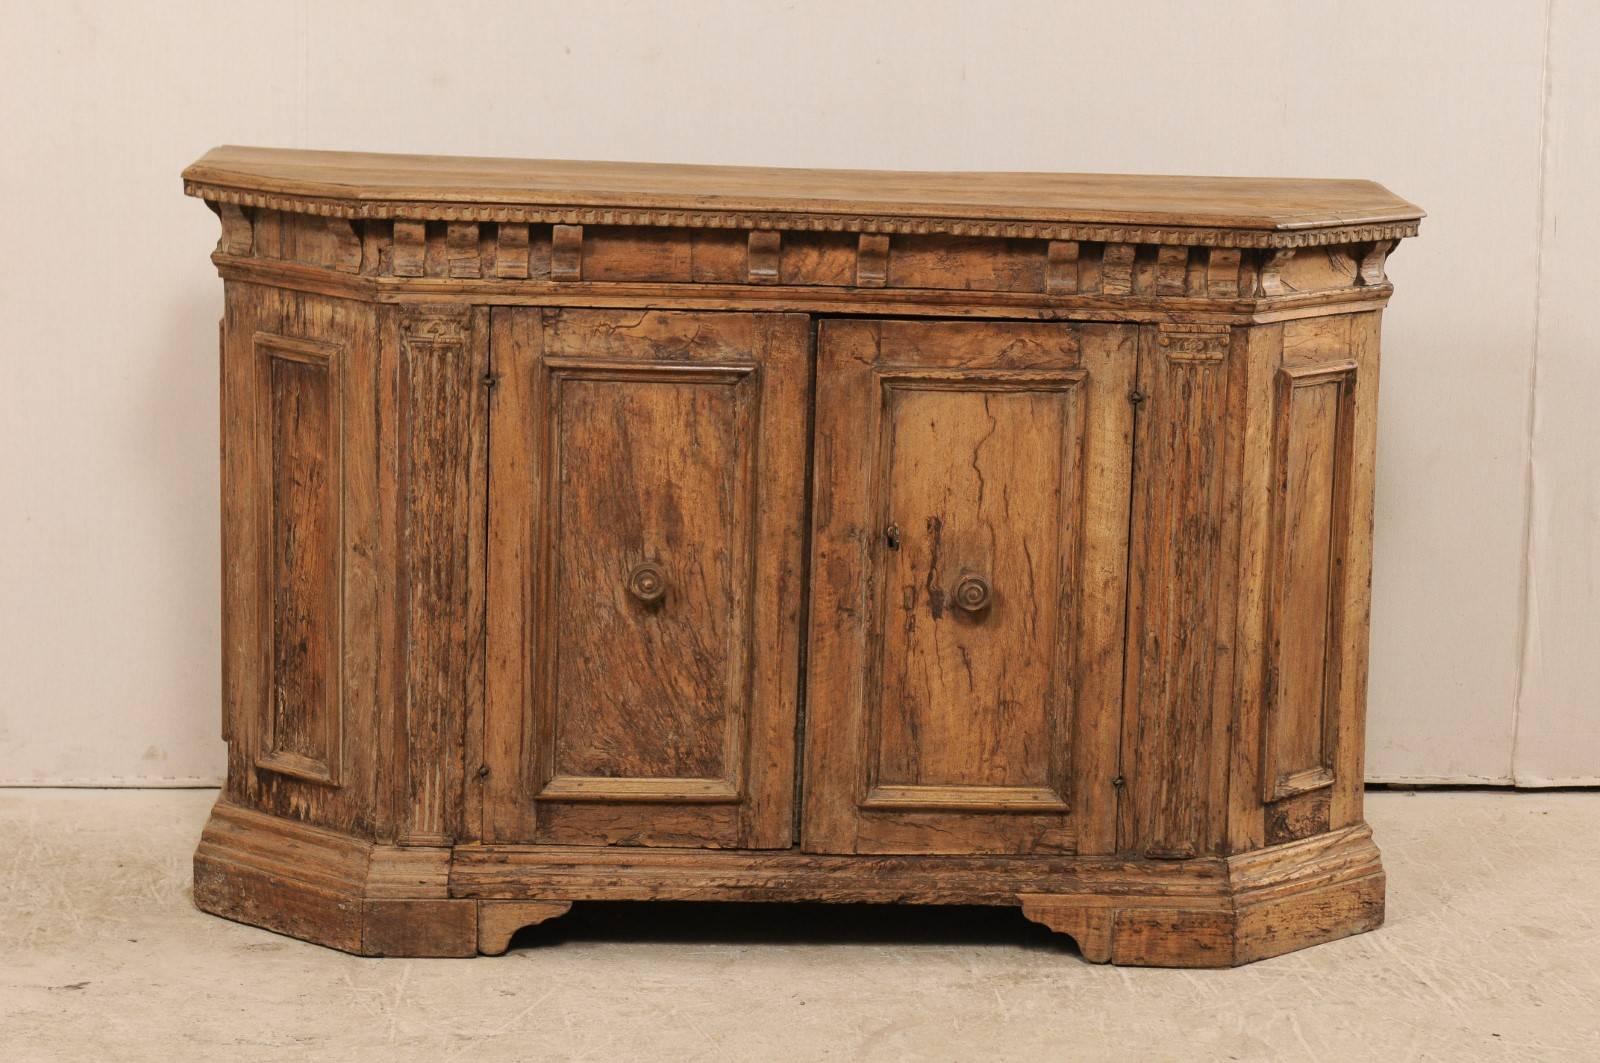 An 18th century Italian sideboard console cabinet of walnut wood. This antique French sideboard of beautiful walnut wood is decorated with rectangular-shaped recessed panels, canted side posts, a slightly overhanging ornately trimmed, and is raised